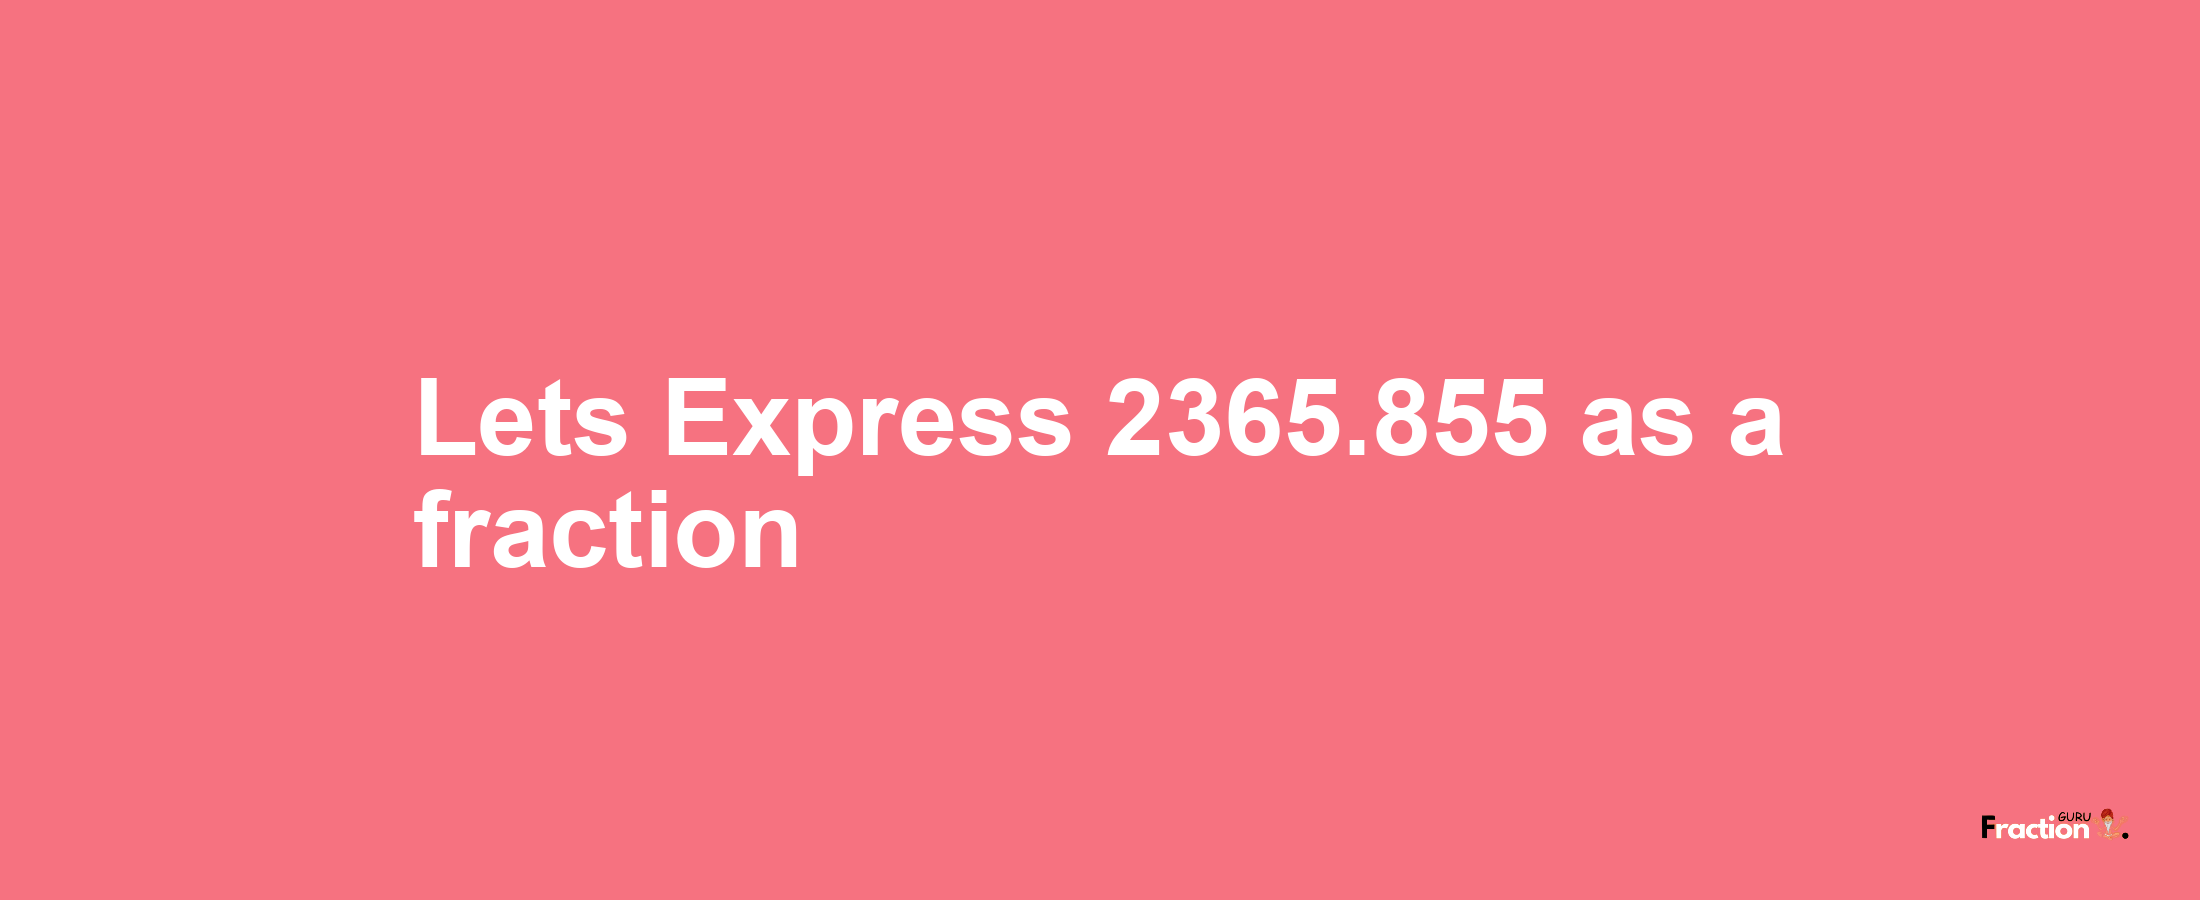 Lets Express 2365.855 as afraction